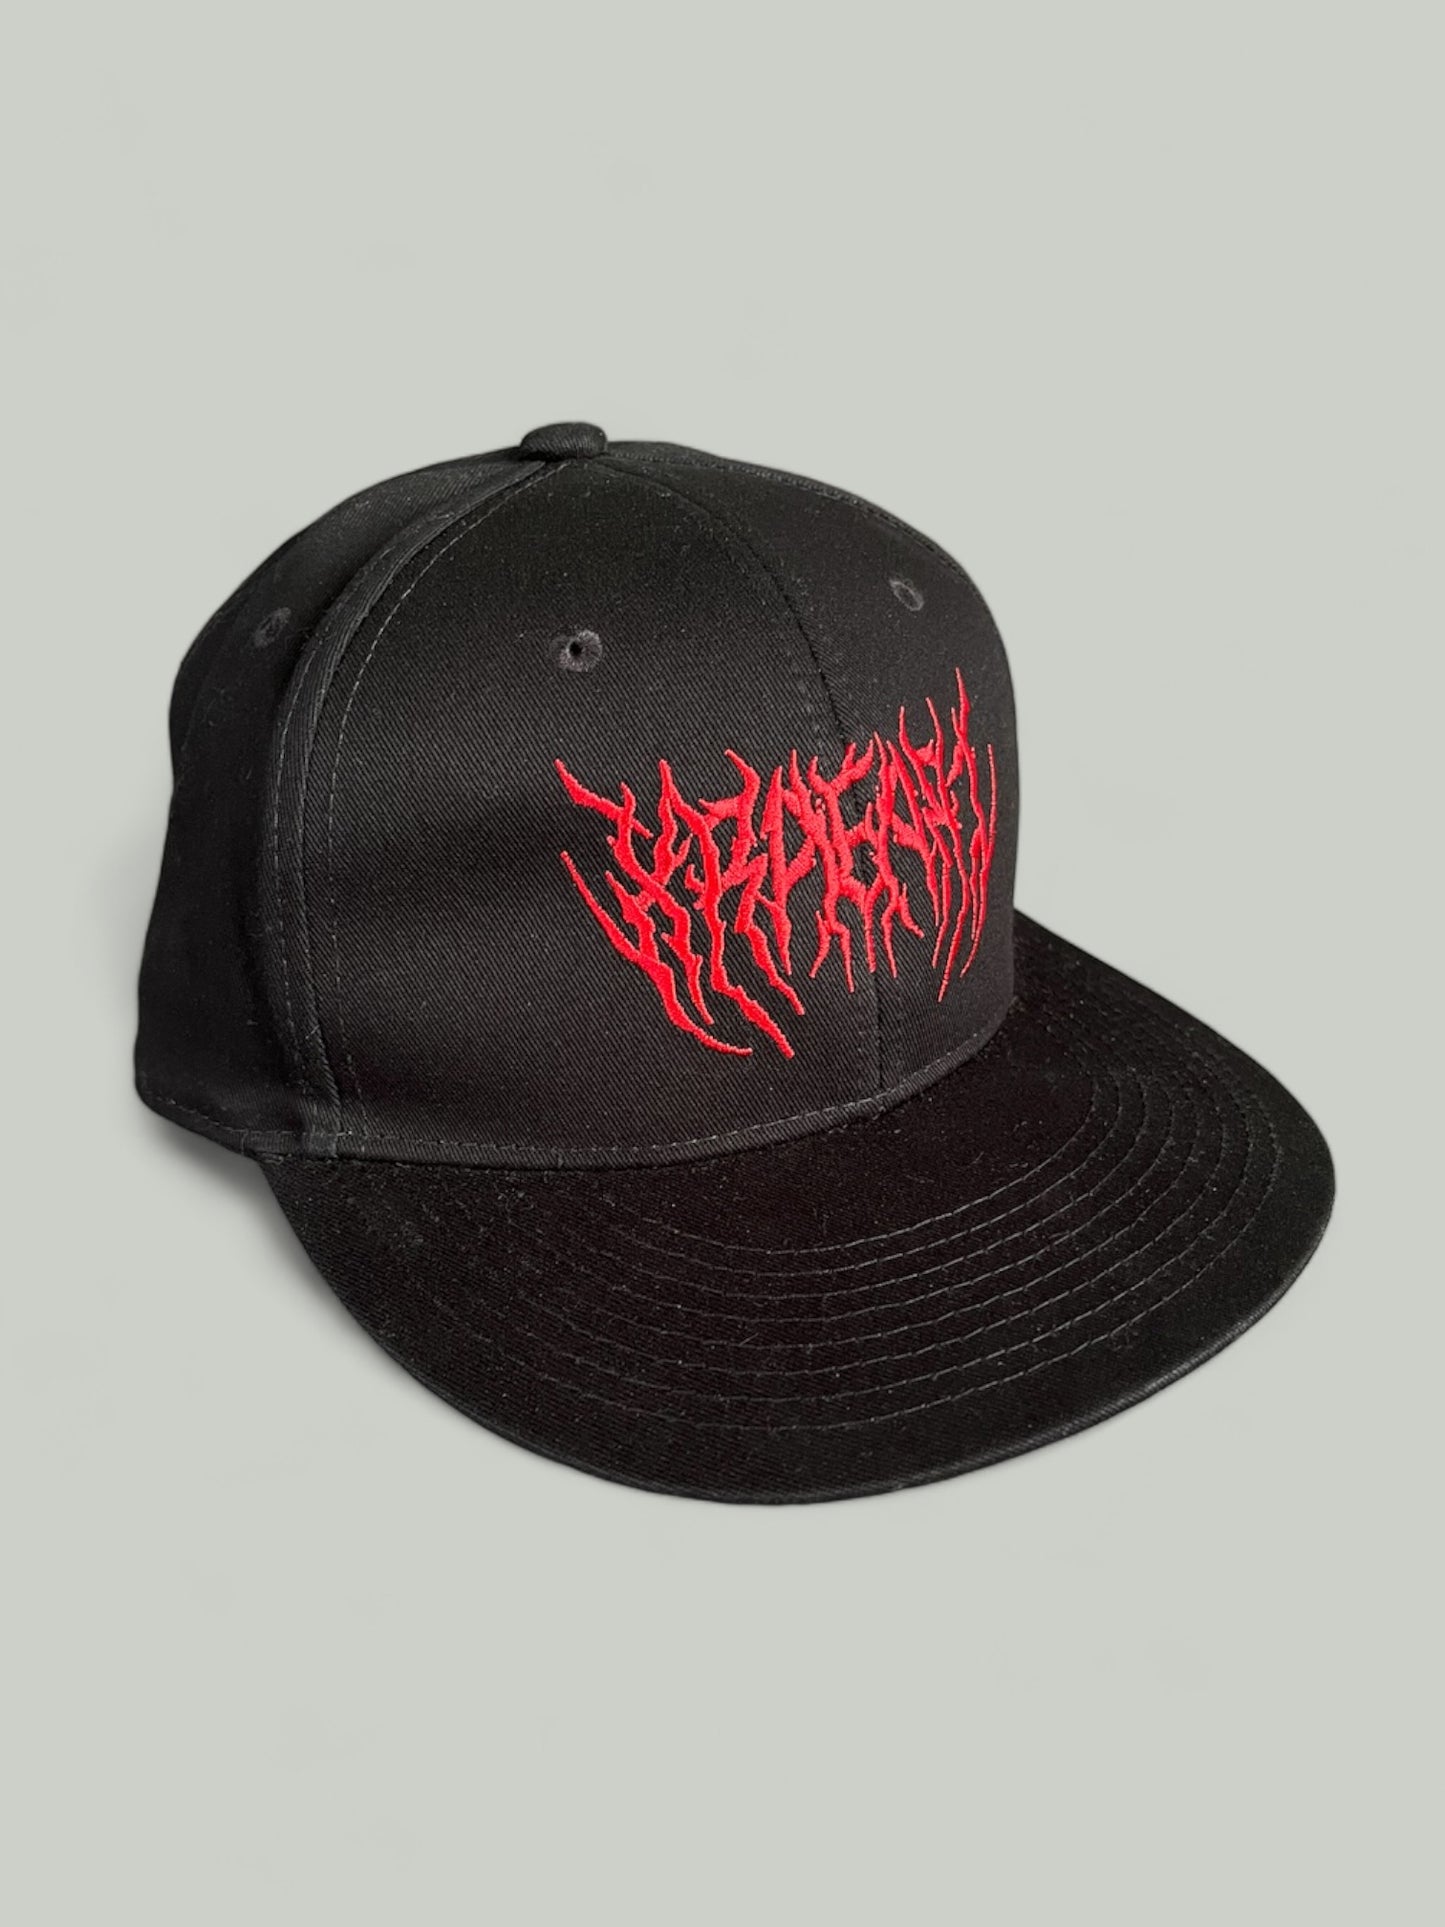 METAL LOGO Red Embroidered Snapback